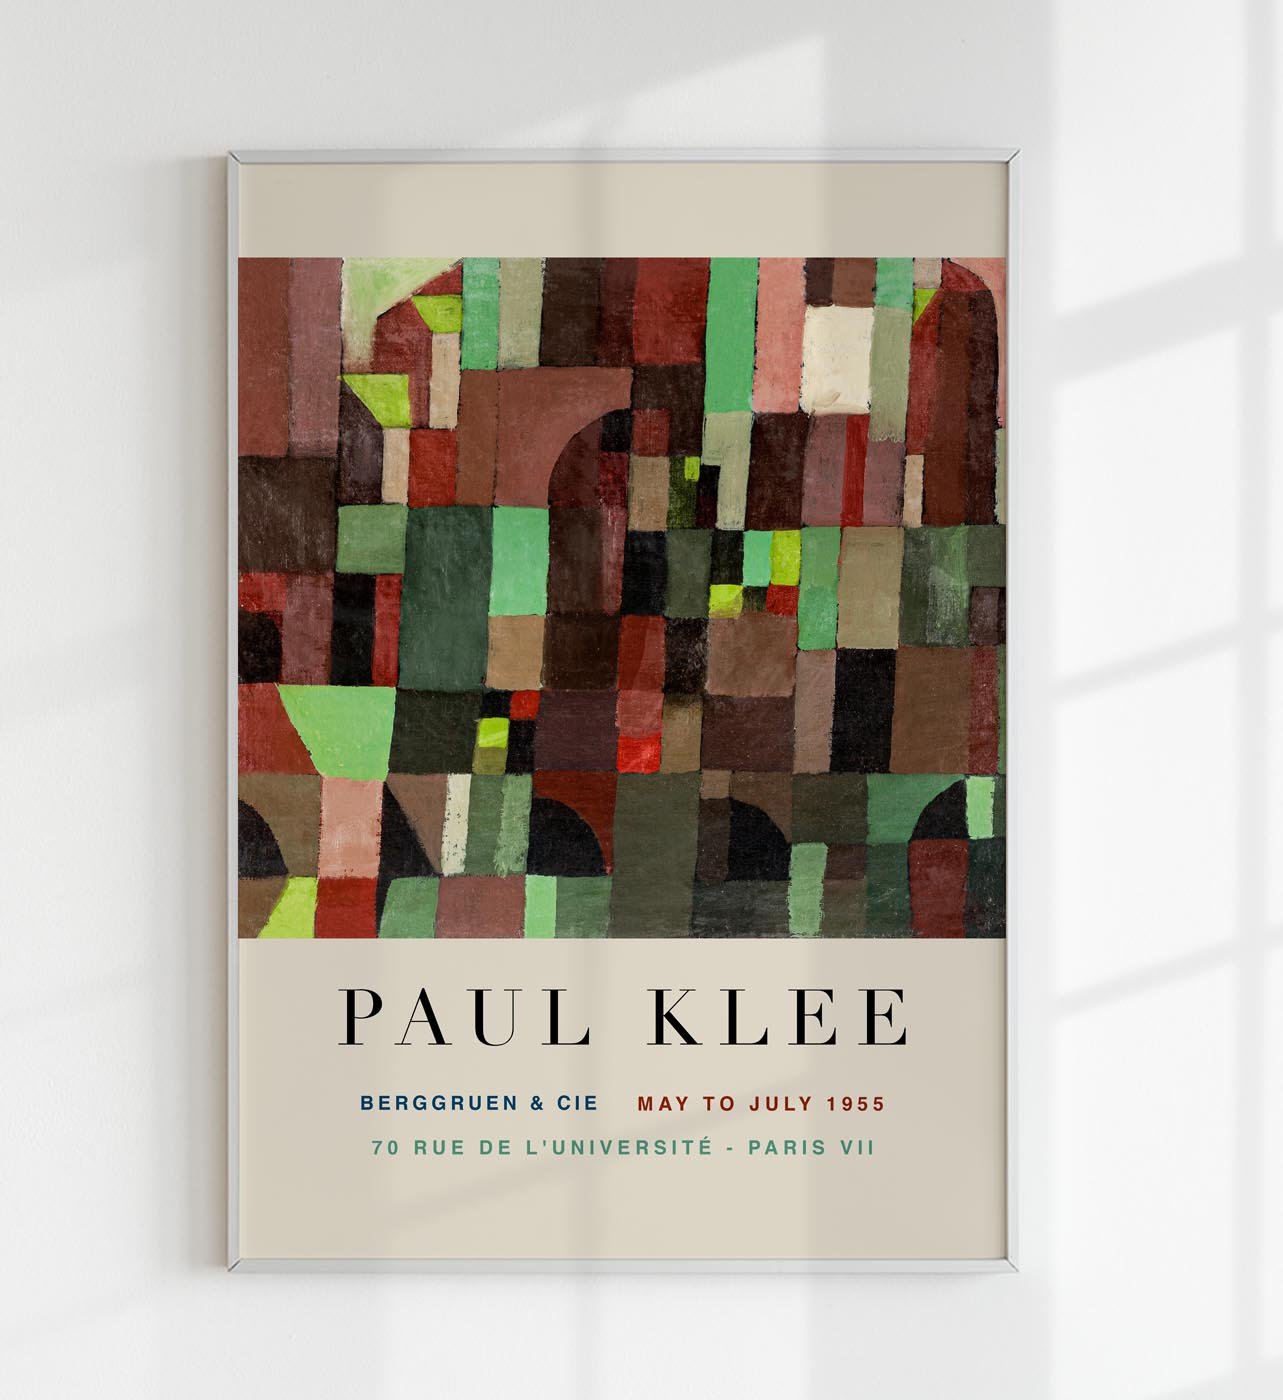 Paul Klee Red and Green Architecture Art Exhibition Poster